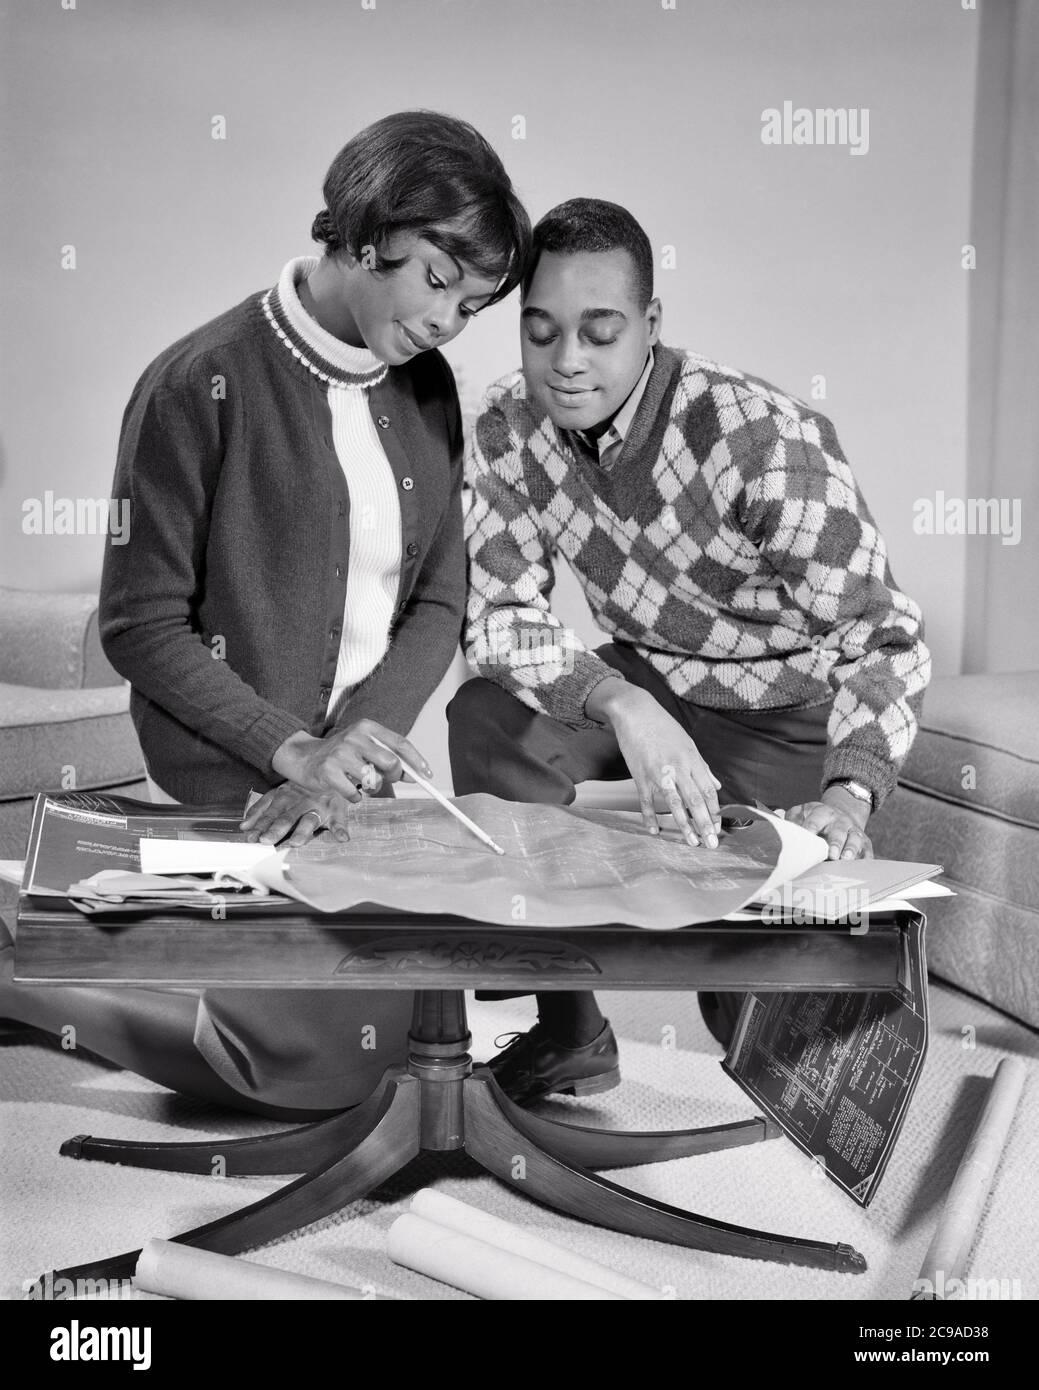 1960s AFRICAN-AMERICAN COUPLE MAN WOMAN HUSBAND AND WIFE HEADS TOGETHER GOING OVER PLANS BLUEPRINTS FOR NEW HOME - n2248 HAR001 HARS STRONG JOY LIFESTYLE SATISFACTION ARCHITECTURE FEMALES HOUSES MARRIED HEADS STUDIO SHOT SPOUSE HUSBANDS HEALTHINESS HOME LIFE PLANS COPY SPACE FRIENDSHIP HALF-LENGTH LADIES PERSONS INSPIRATION RESIDENTIAL CARING MALES PLANNING BUILDINGS CONFIDENCE BLUEPRINTS B&W PARTNER GOALS DREAMS HAPPINESS PROPERTY AFRICAN-AMERICANS AFRICAN-AMERICAN PROGRESS BLACK ETHNICITY PRIDE OPPORTUNITY HOMES REAL ESTATE CONNECTION CONCEPTUAL STRUCTURES RESIDENCE STYLISH EDIFICE Stock Photo